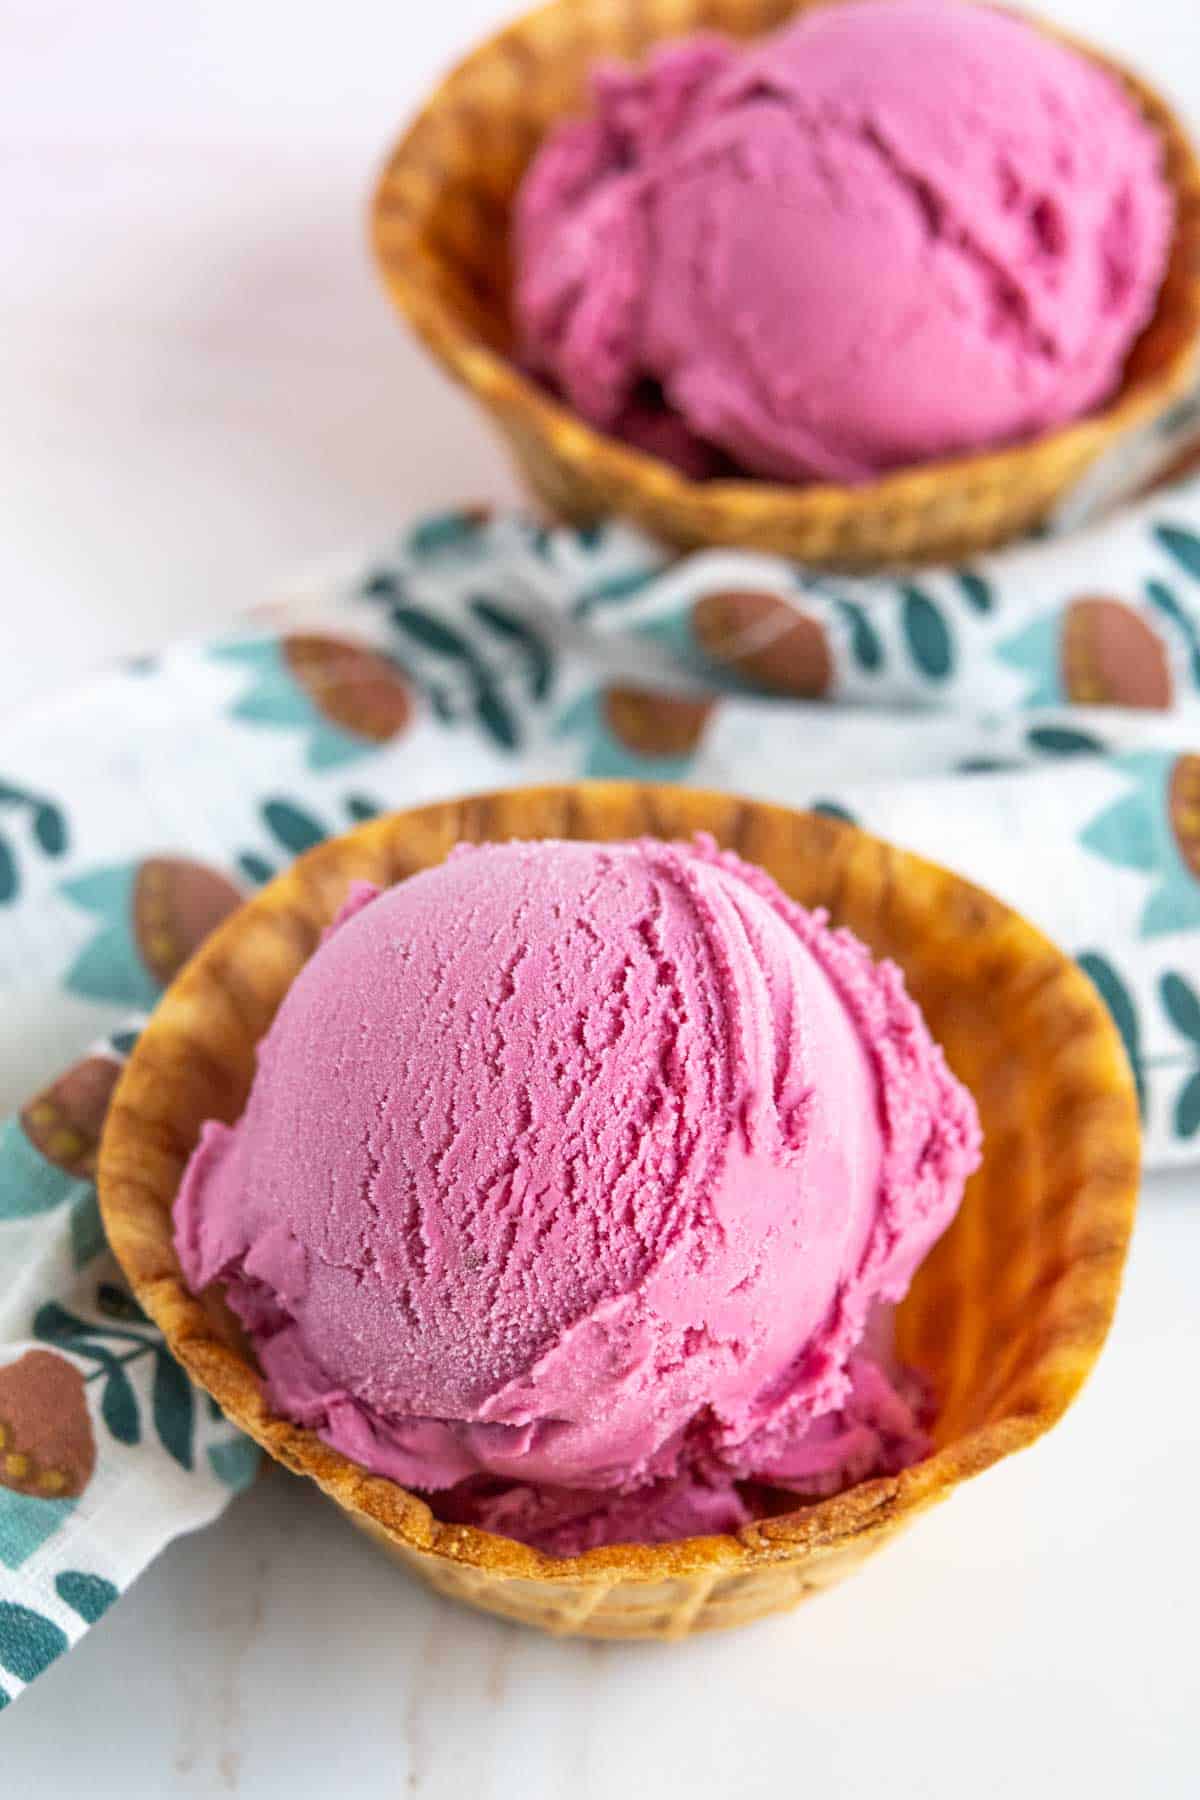 Two scoops of pink ice cream served in waffle bowls, placed on a white surface with a patterned cloth in the background.